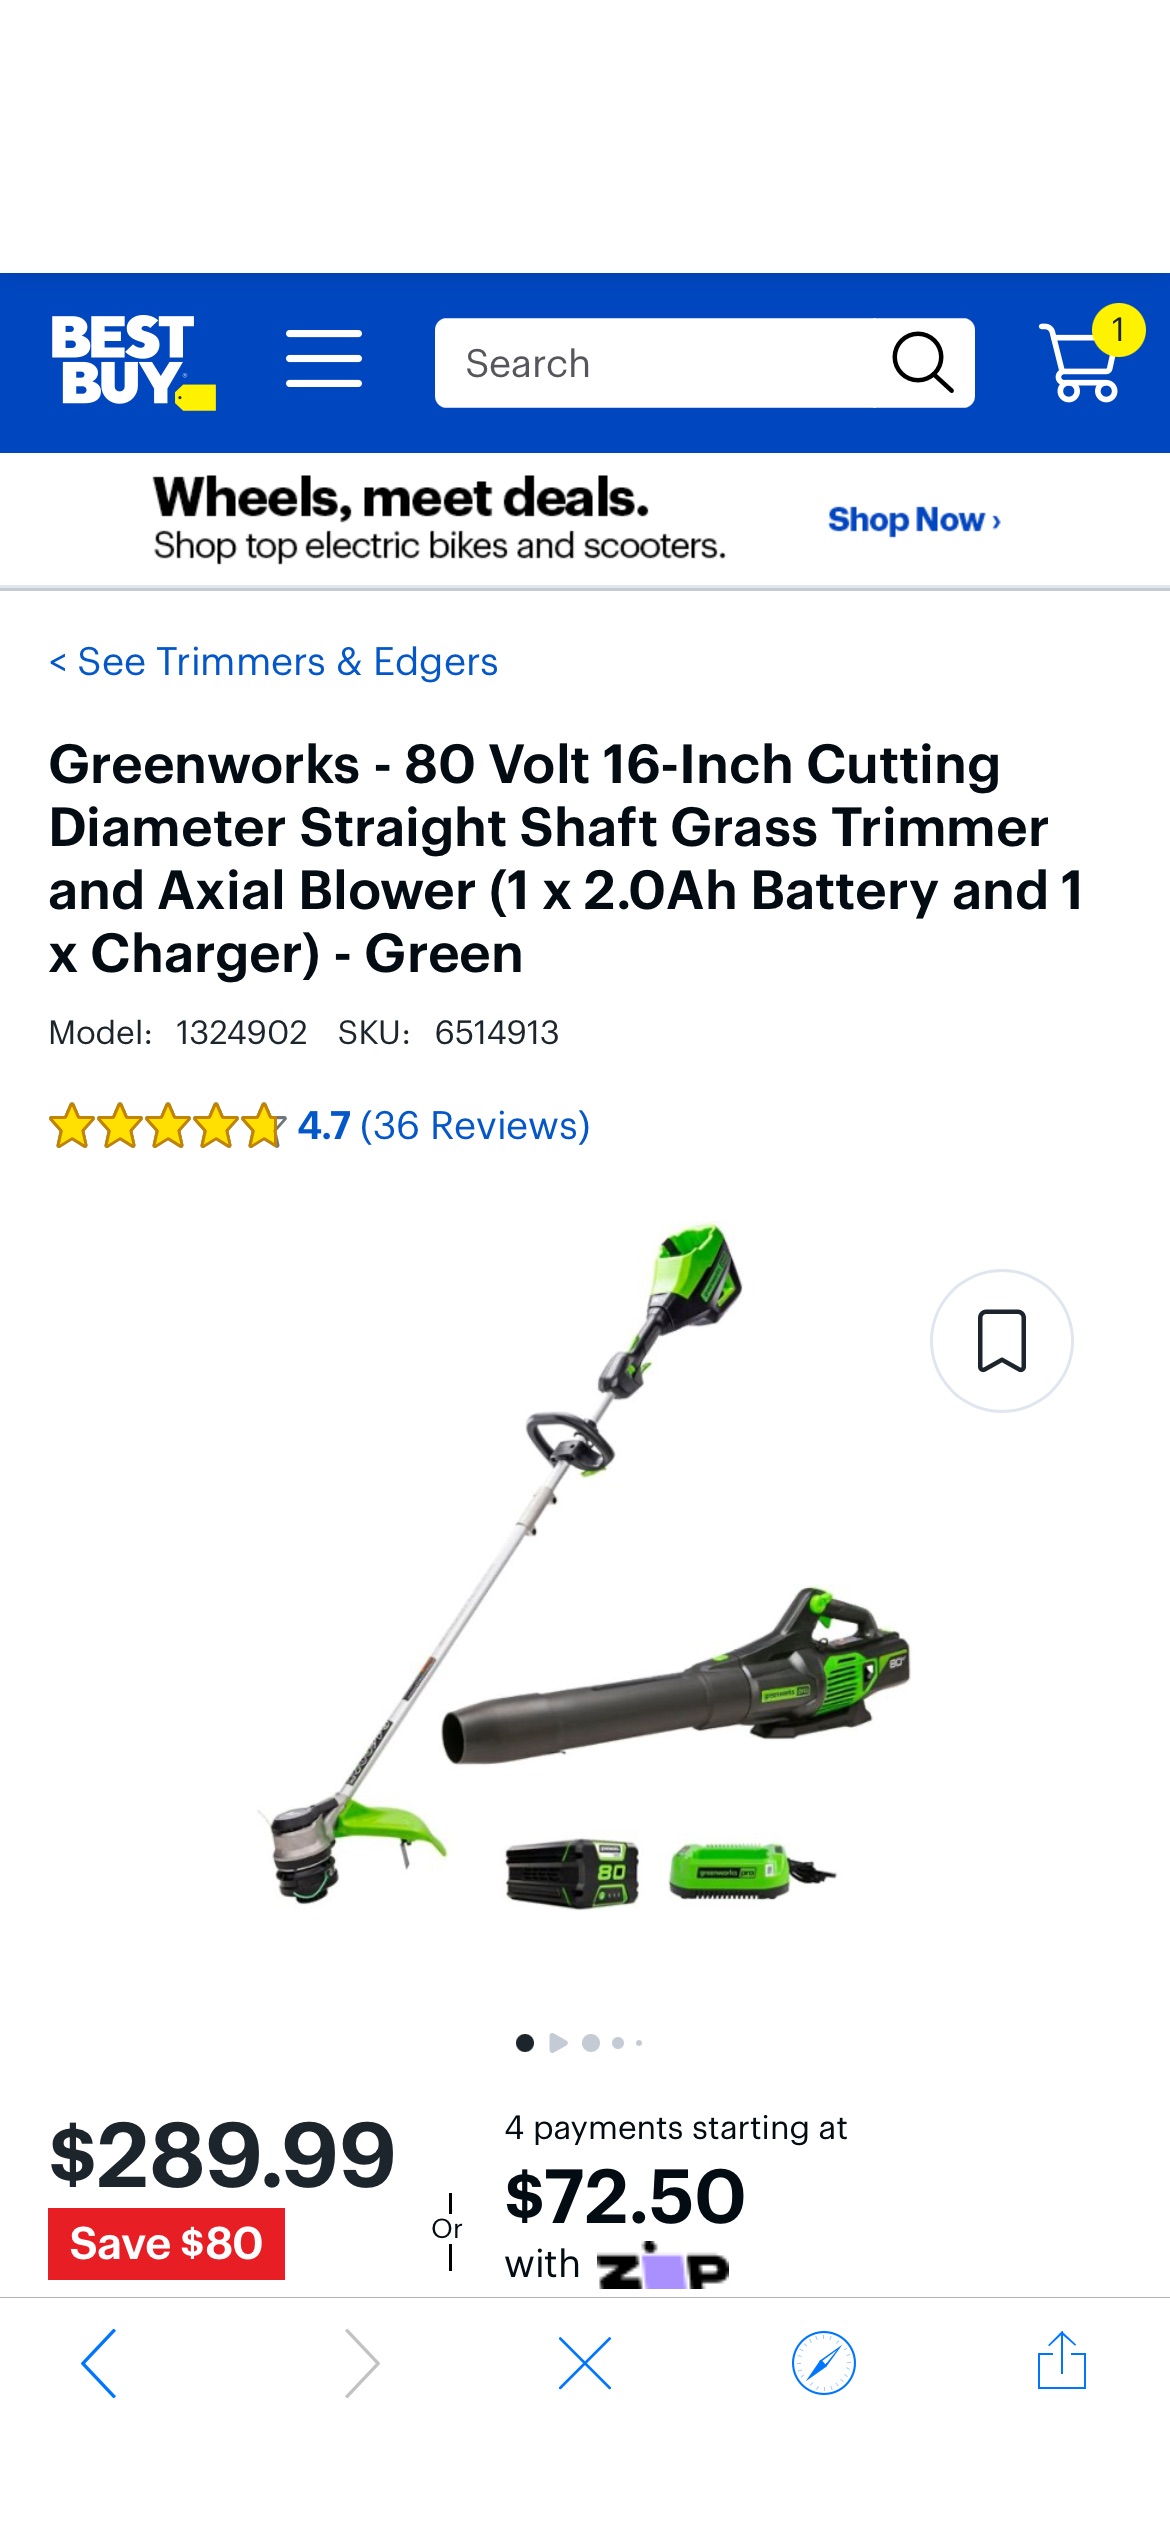 Greenworks 80 Volt 16-Inch Cutting Diameter Straight Shaft Grass Trimmer and Axial Blower (1 x 2.0Ah Battery and 1 x Charger) Green 1324902 - Best Buy